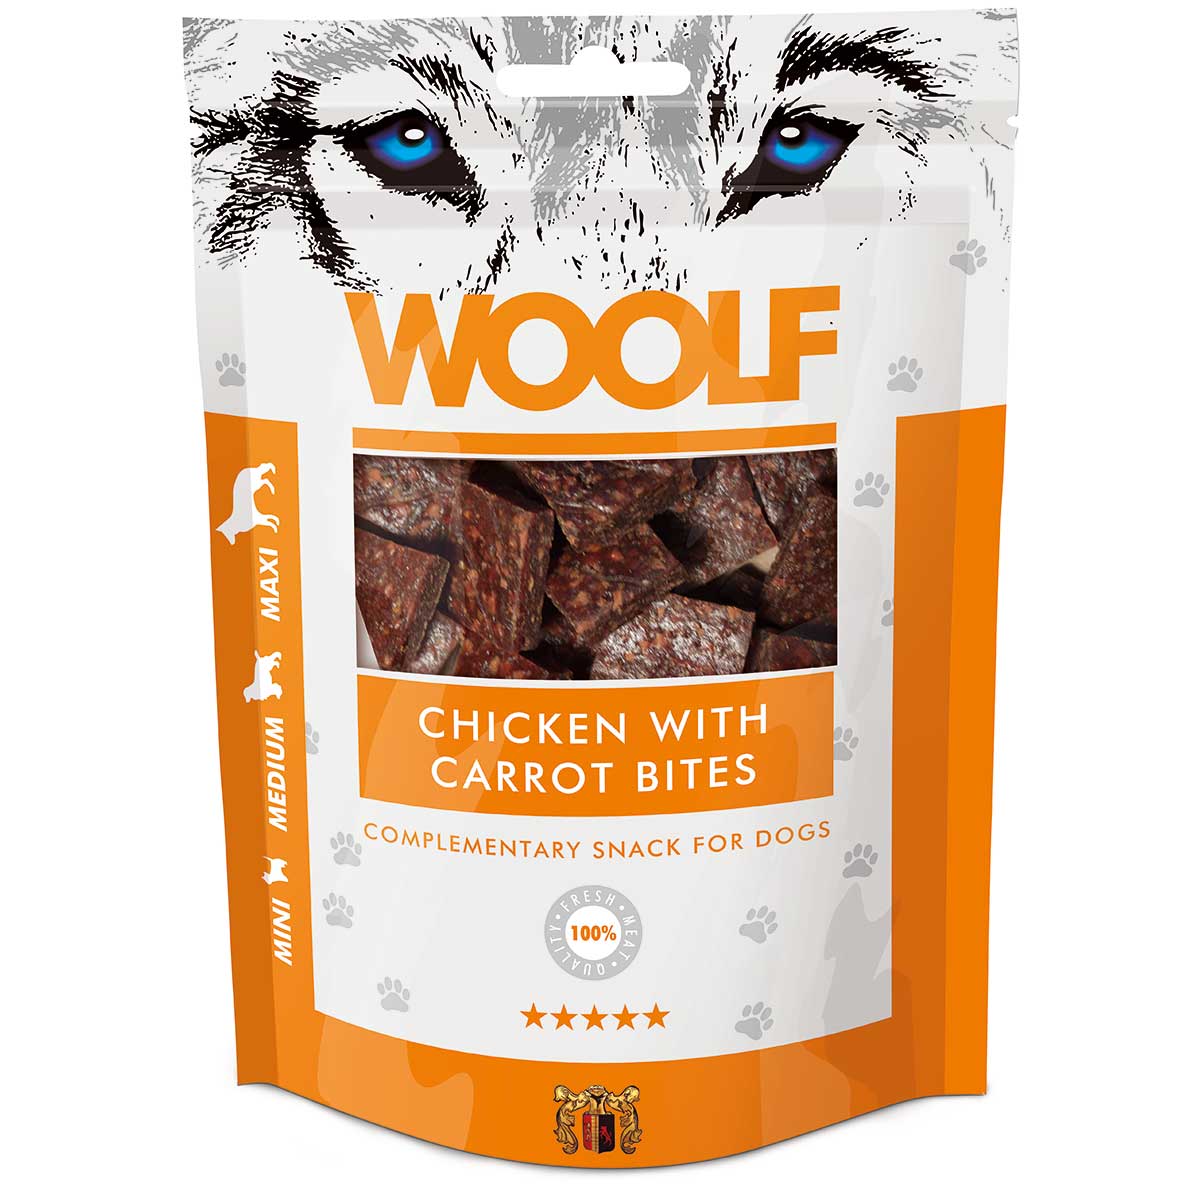 Woolf Dog treat chicken with carrots